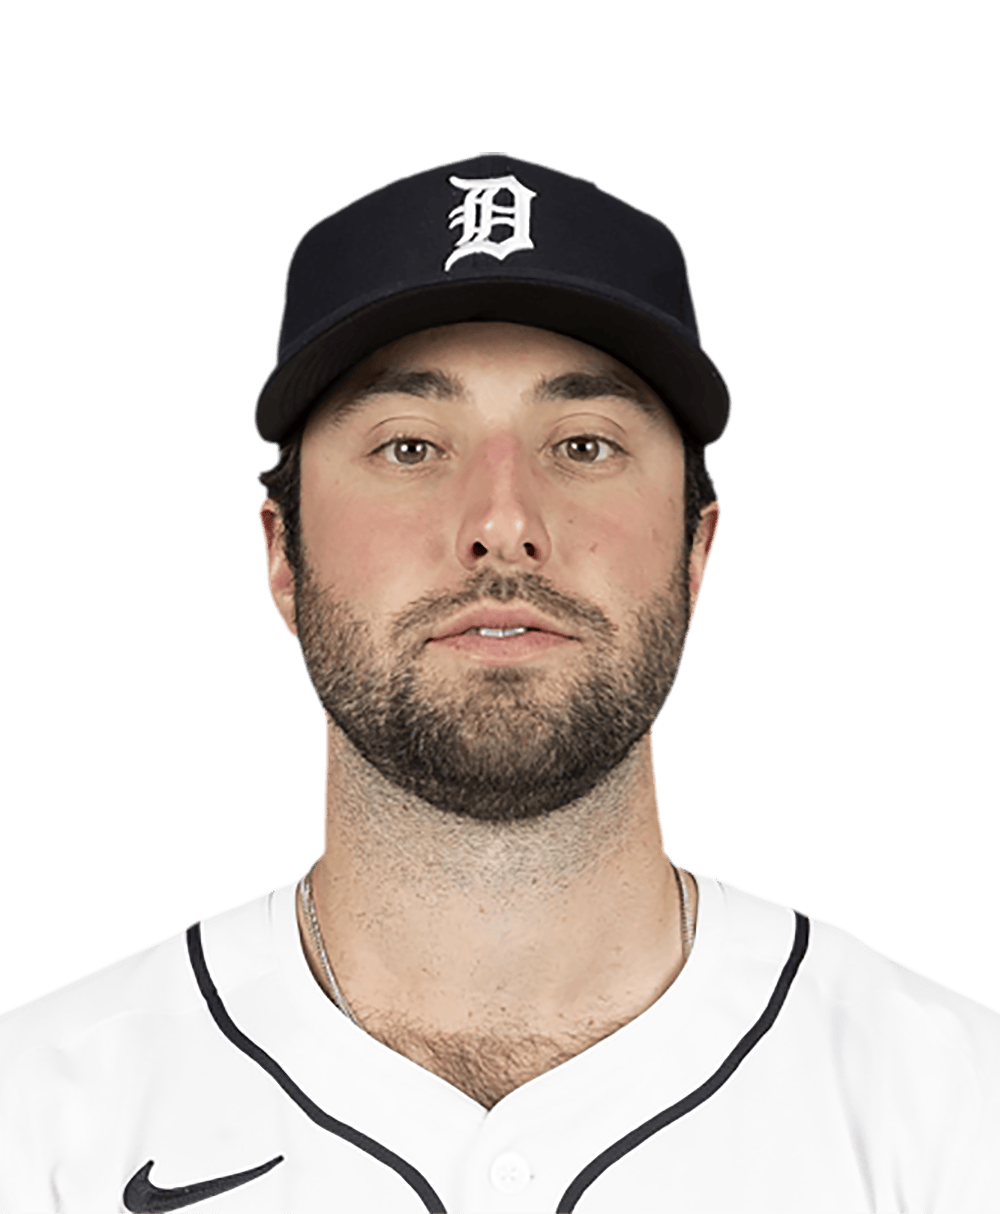 Matt Vierling - MLB Right field - News, Stats, Bio and more - The Athletic